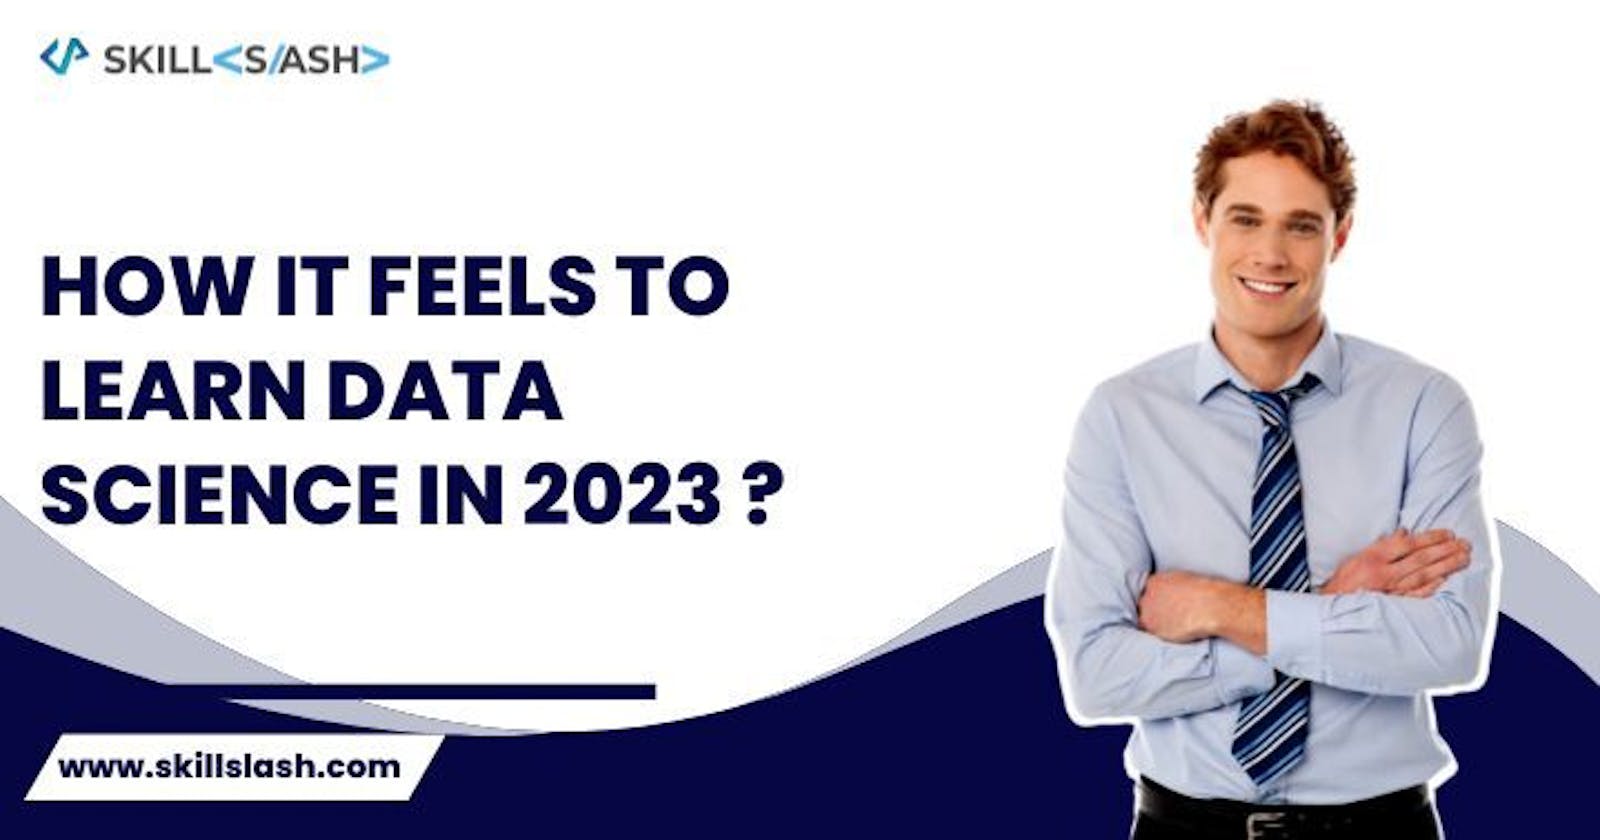 How does It feel to Learn Data Science in 2023?